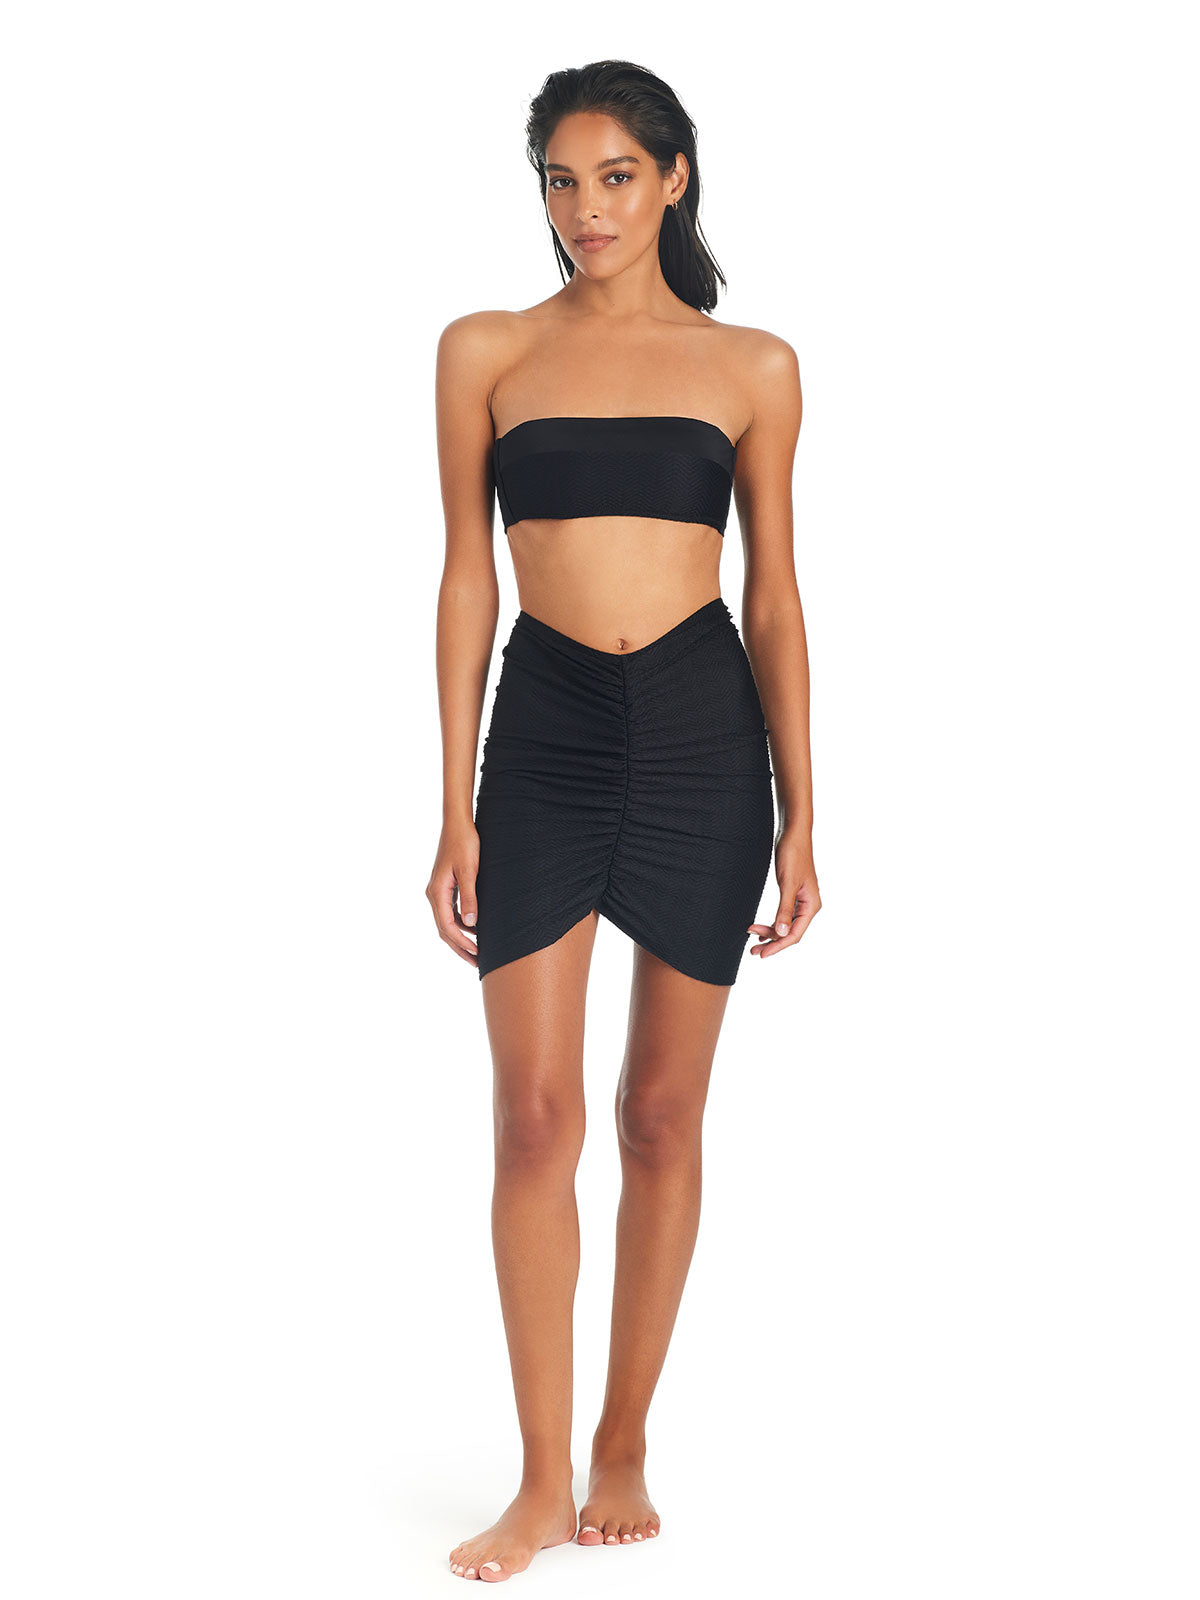 On The Water Texture Cover-Up Skirt Black